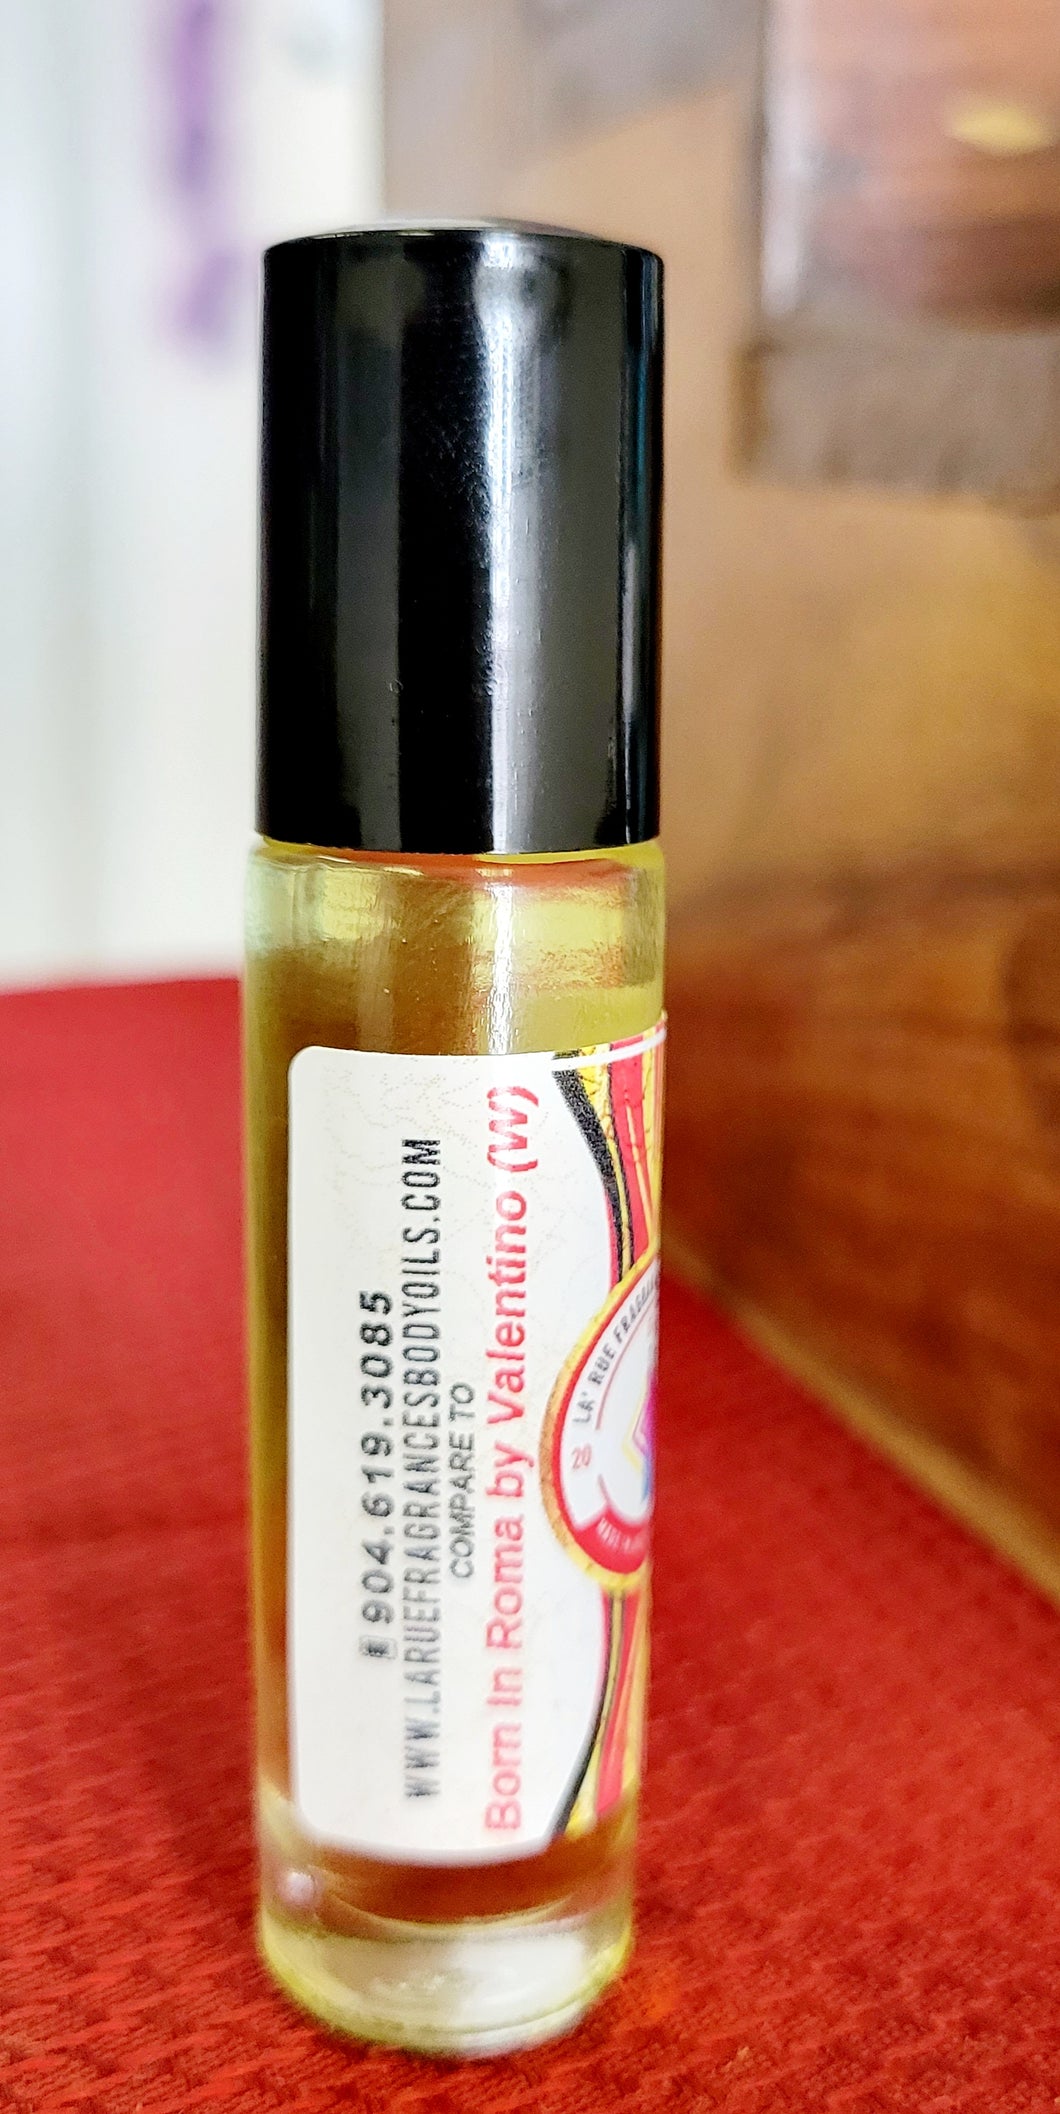 (Premium Fragrance) Our Impression of Valentino Donna Born In Roma by Valentino for women 1/3oz roll-on perfume fragrance body oil alcohol-free (women)